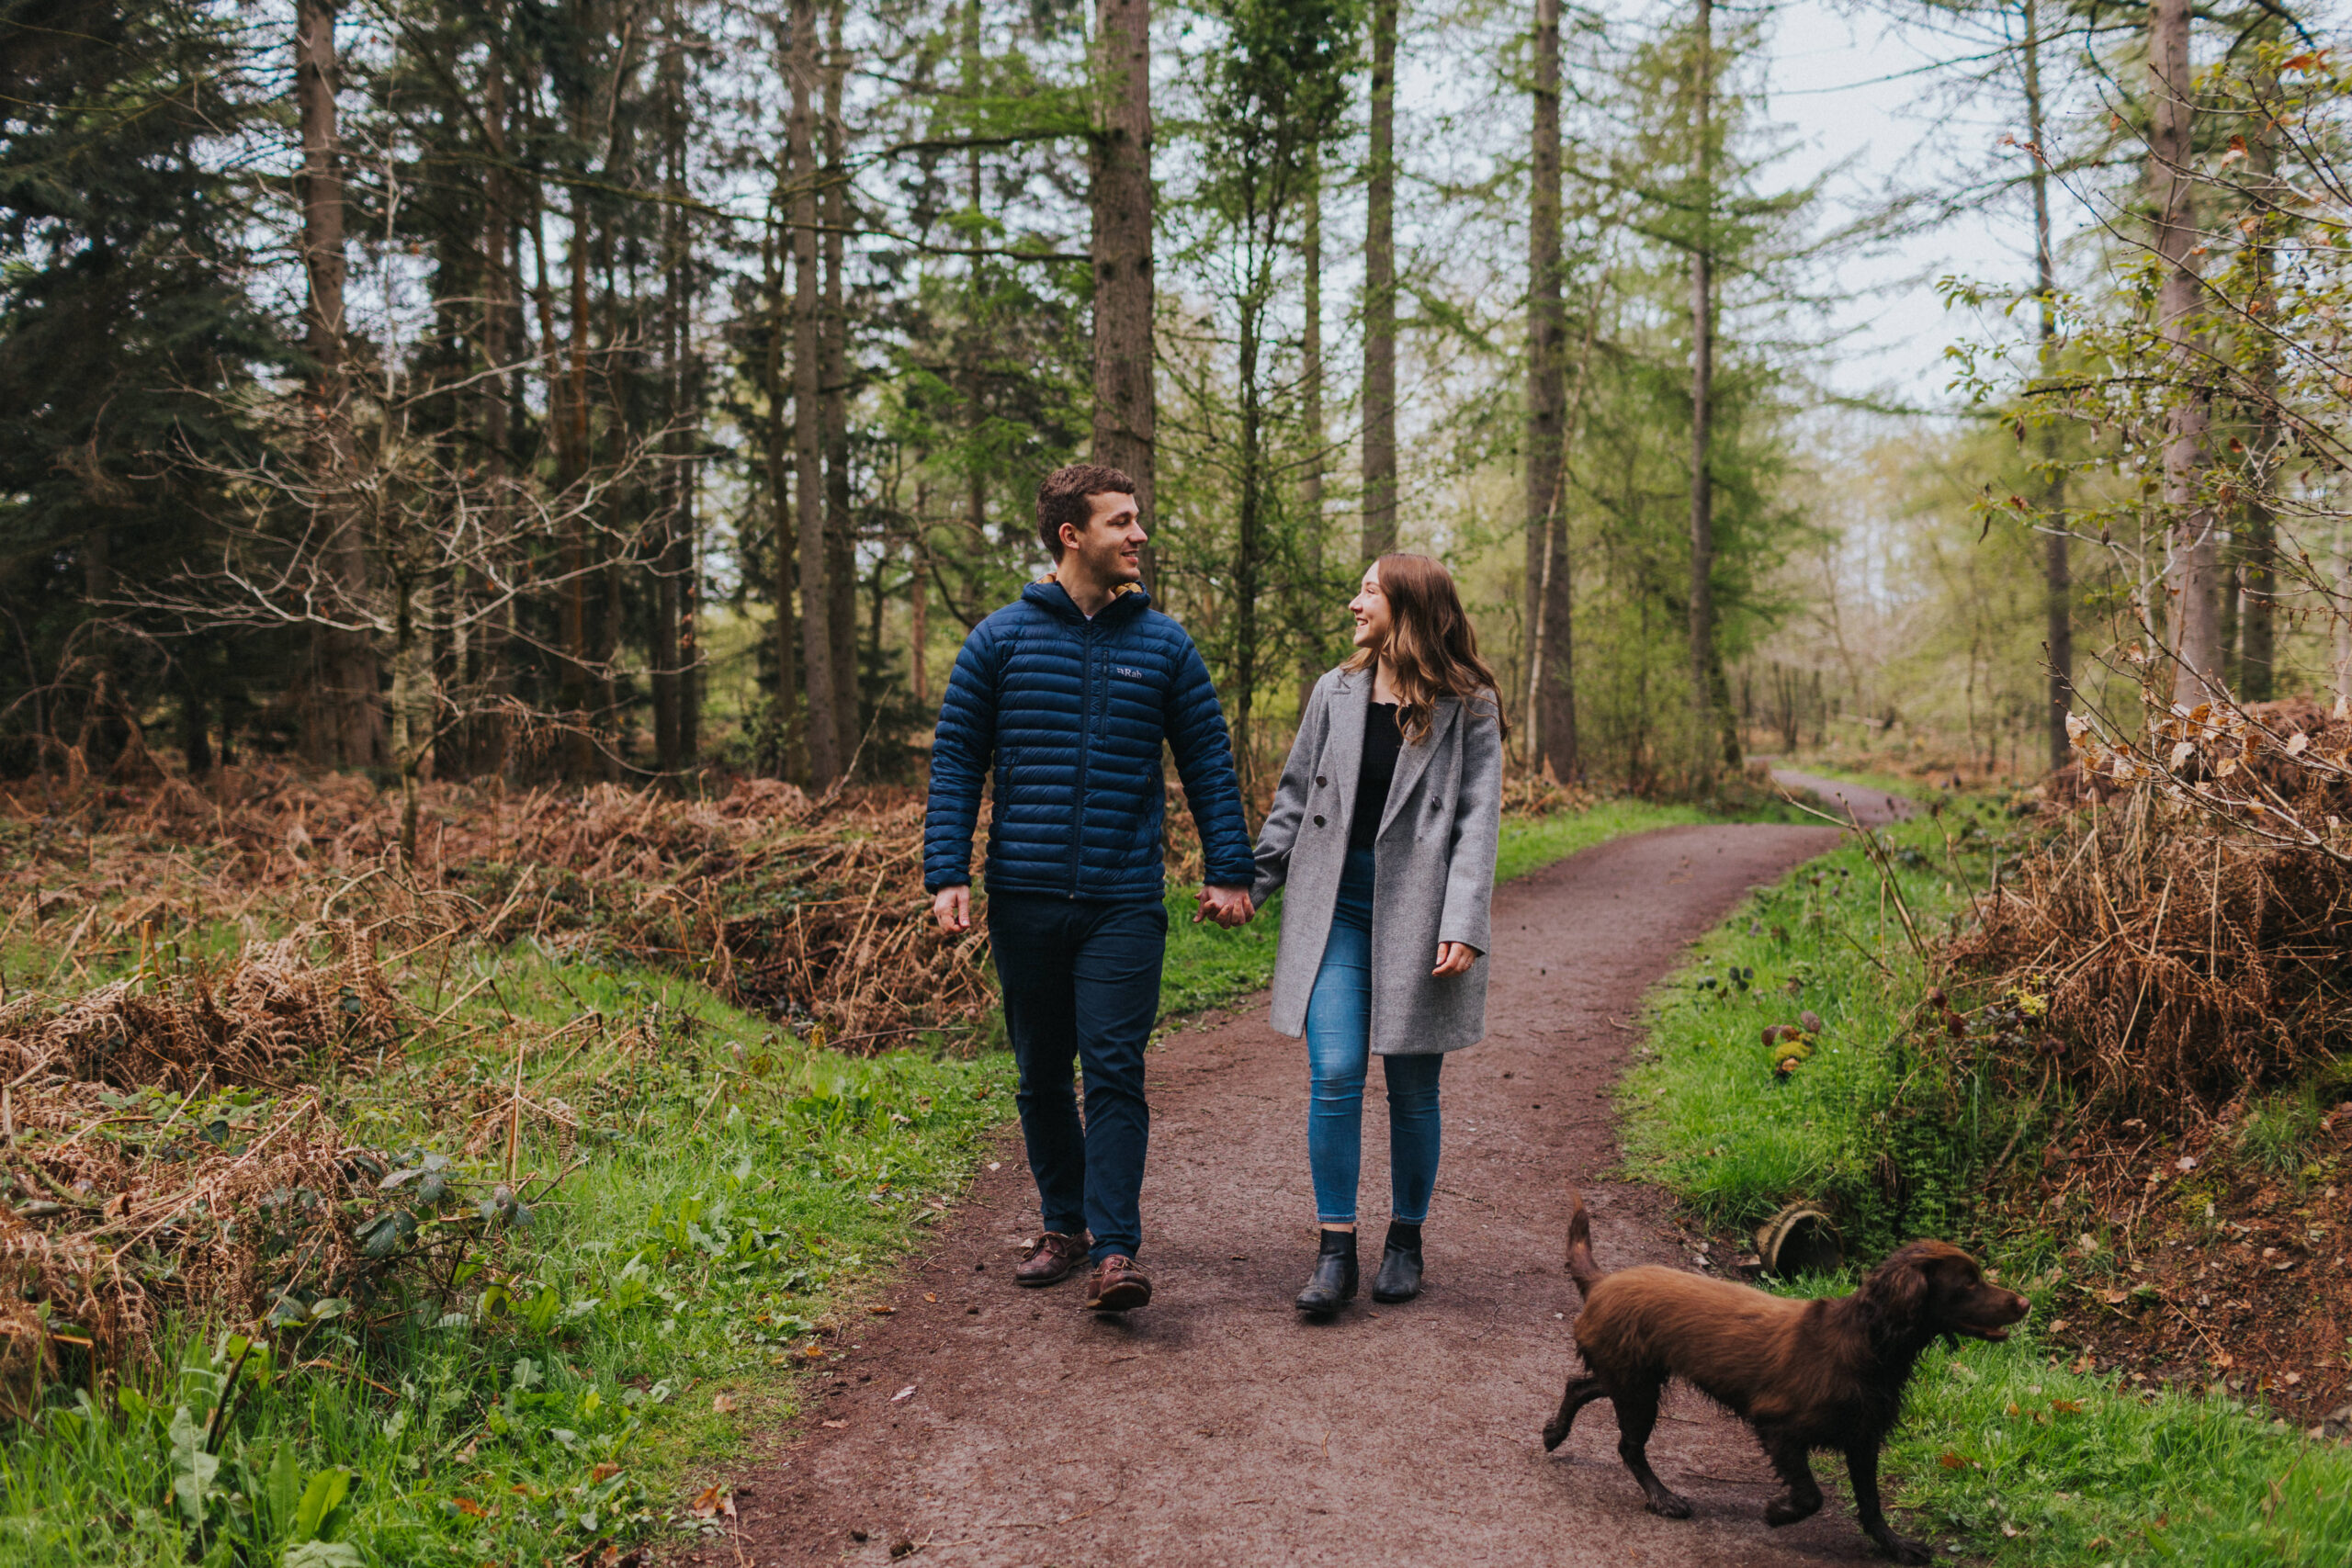 Alice and Tom's engagement shoot story